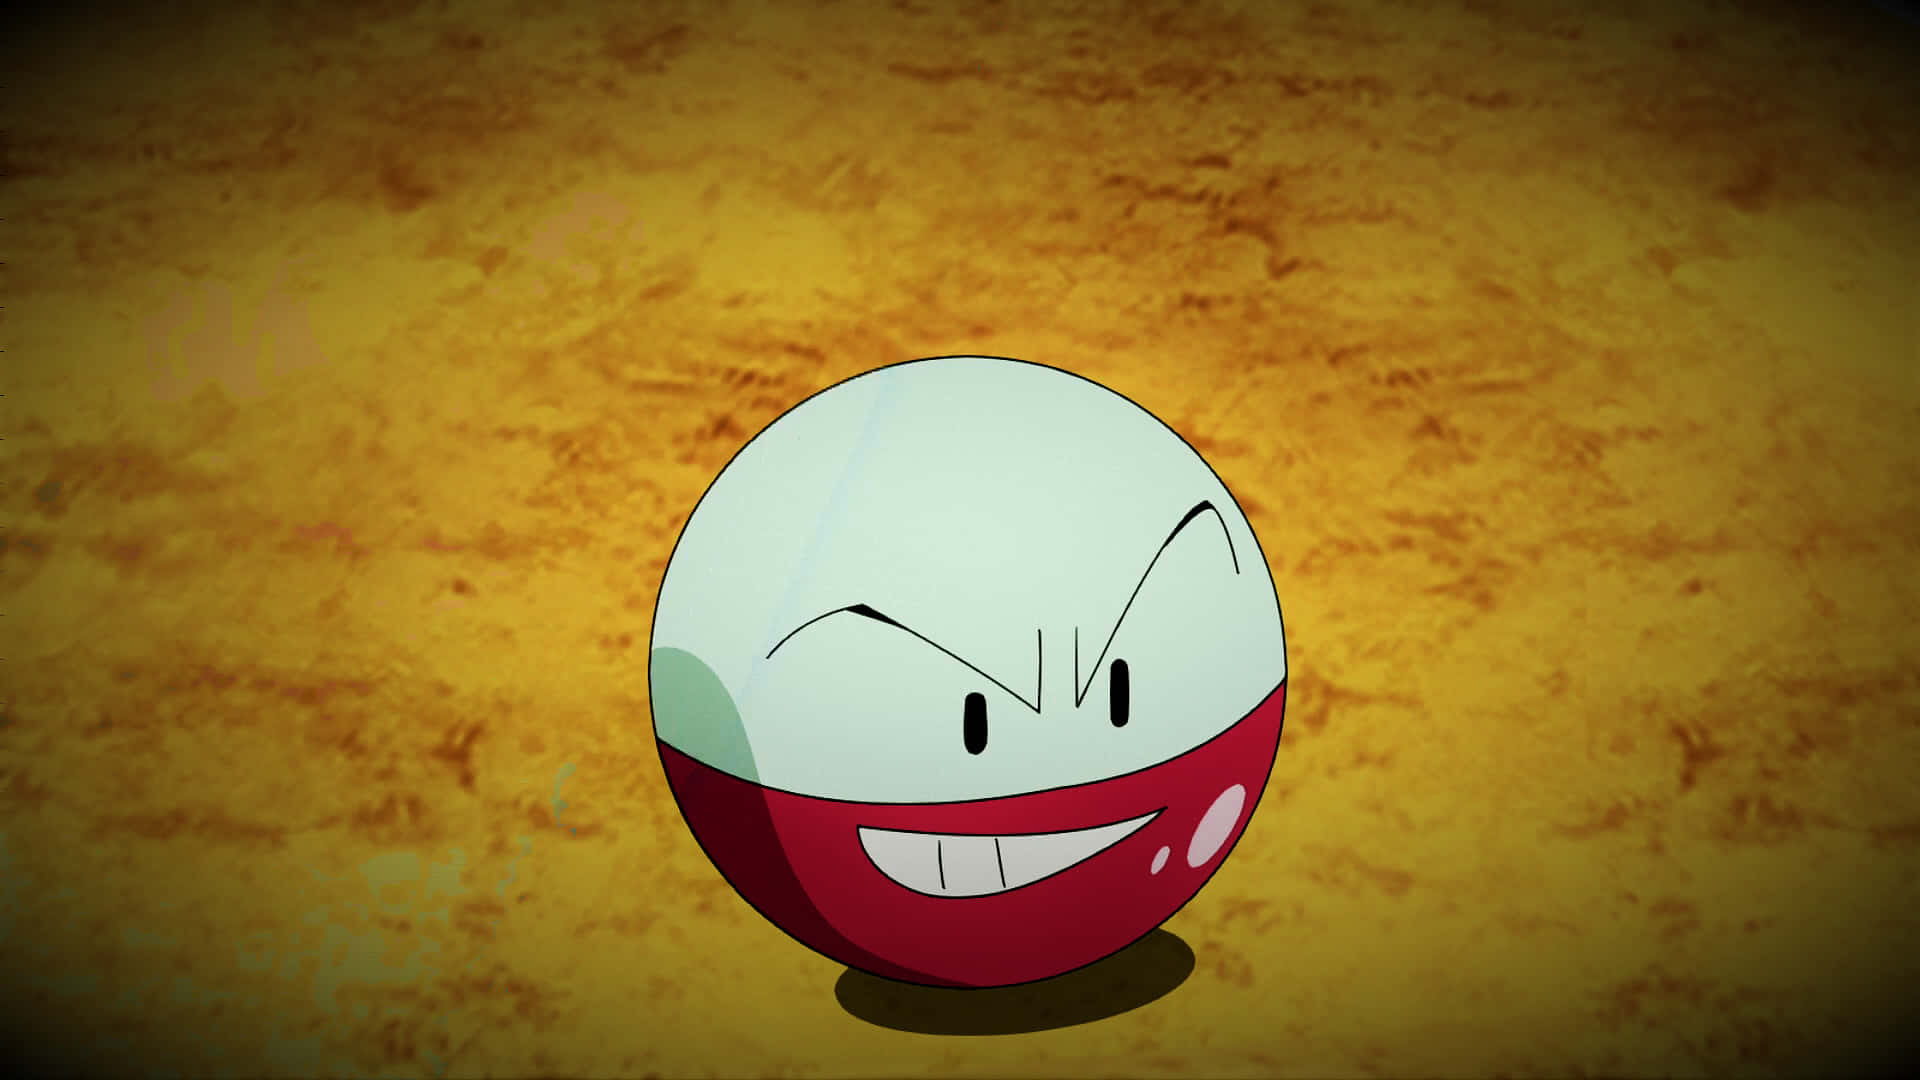 Electrode On Ground Wallpaper